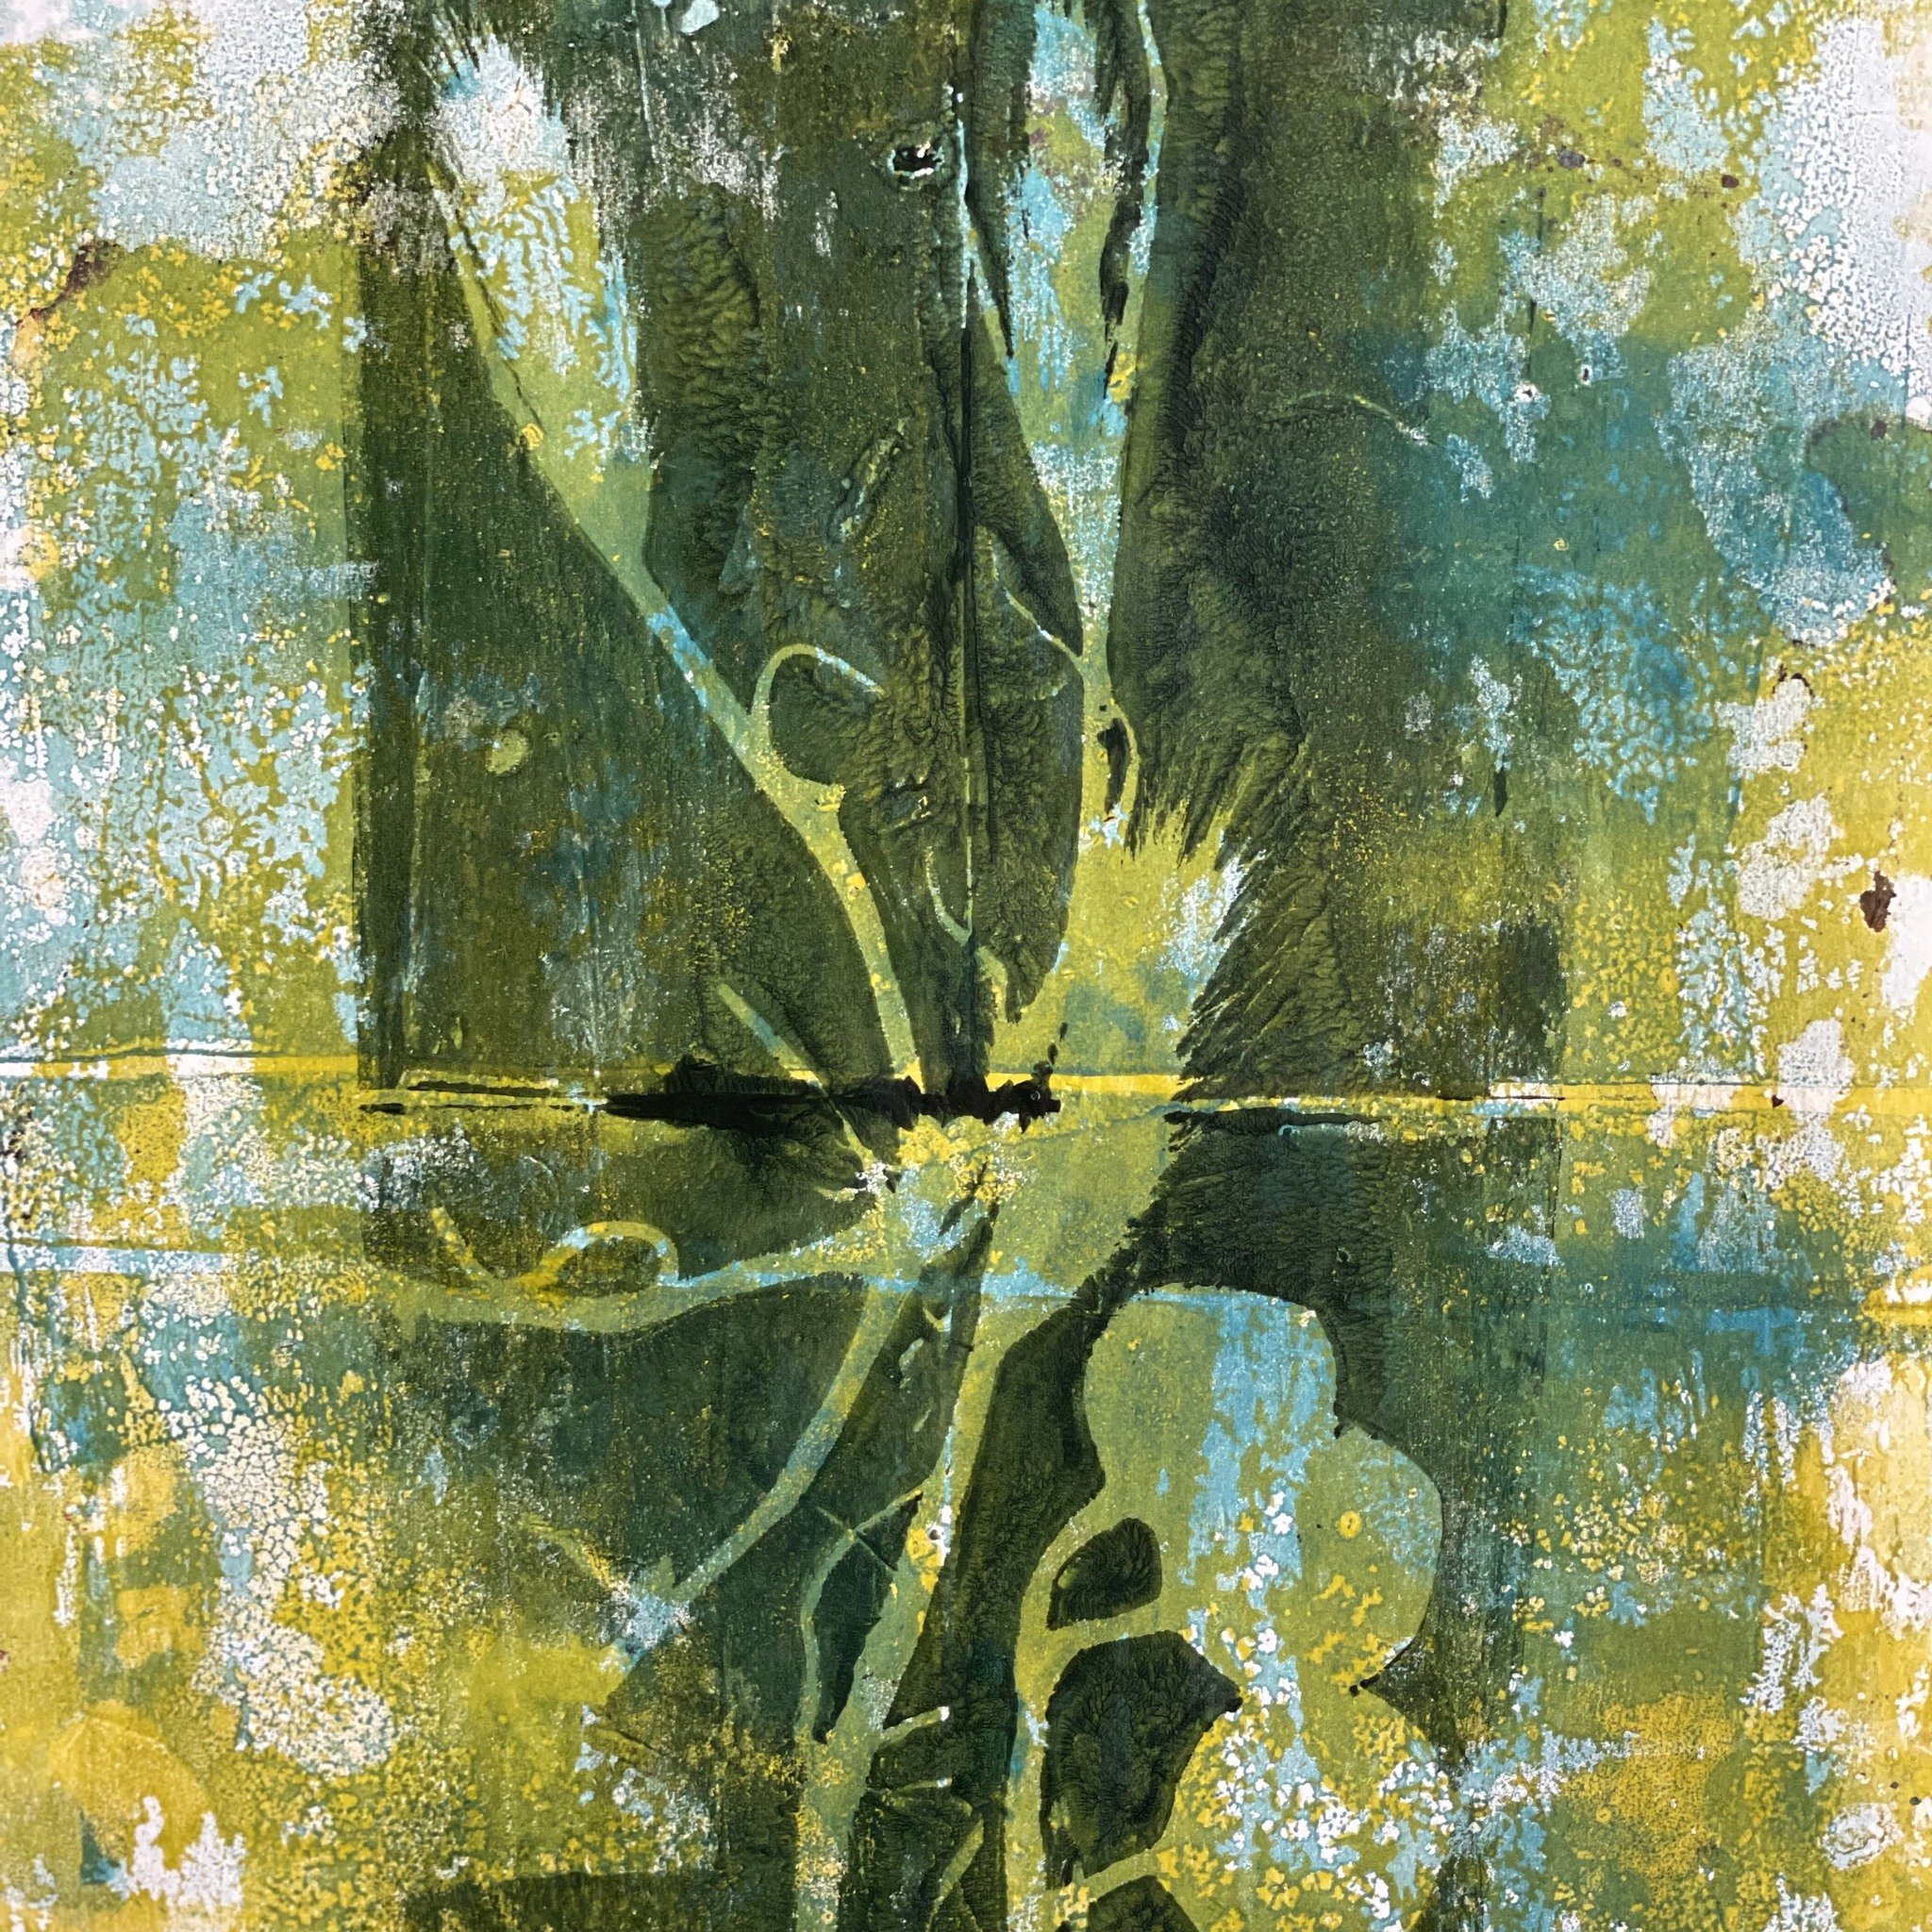 Botanical Gelli Printing Earth Day Art Workshop for anyone, regardless of experience. The goal is to peer into the magnificence of our natural world from the hills of Santa Barbara. Check out our events page to sign up. We'd love you to join in!